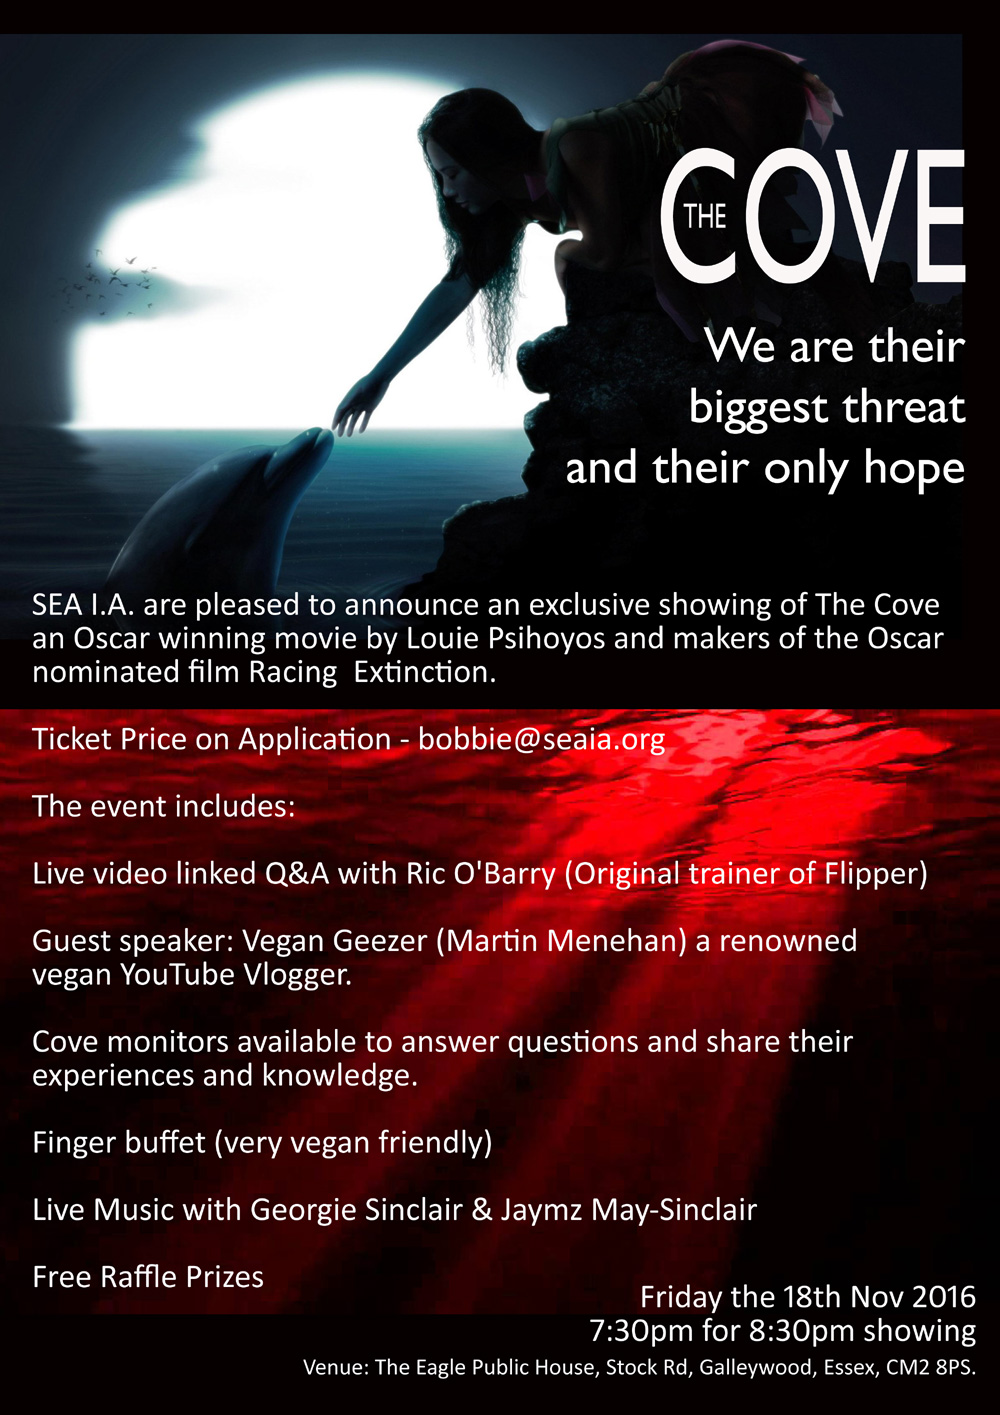 The Cove Event